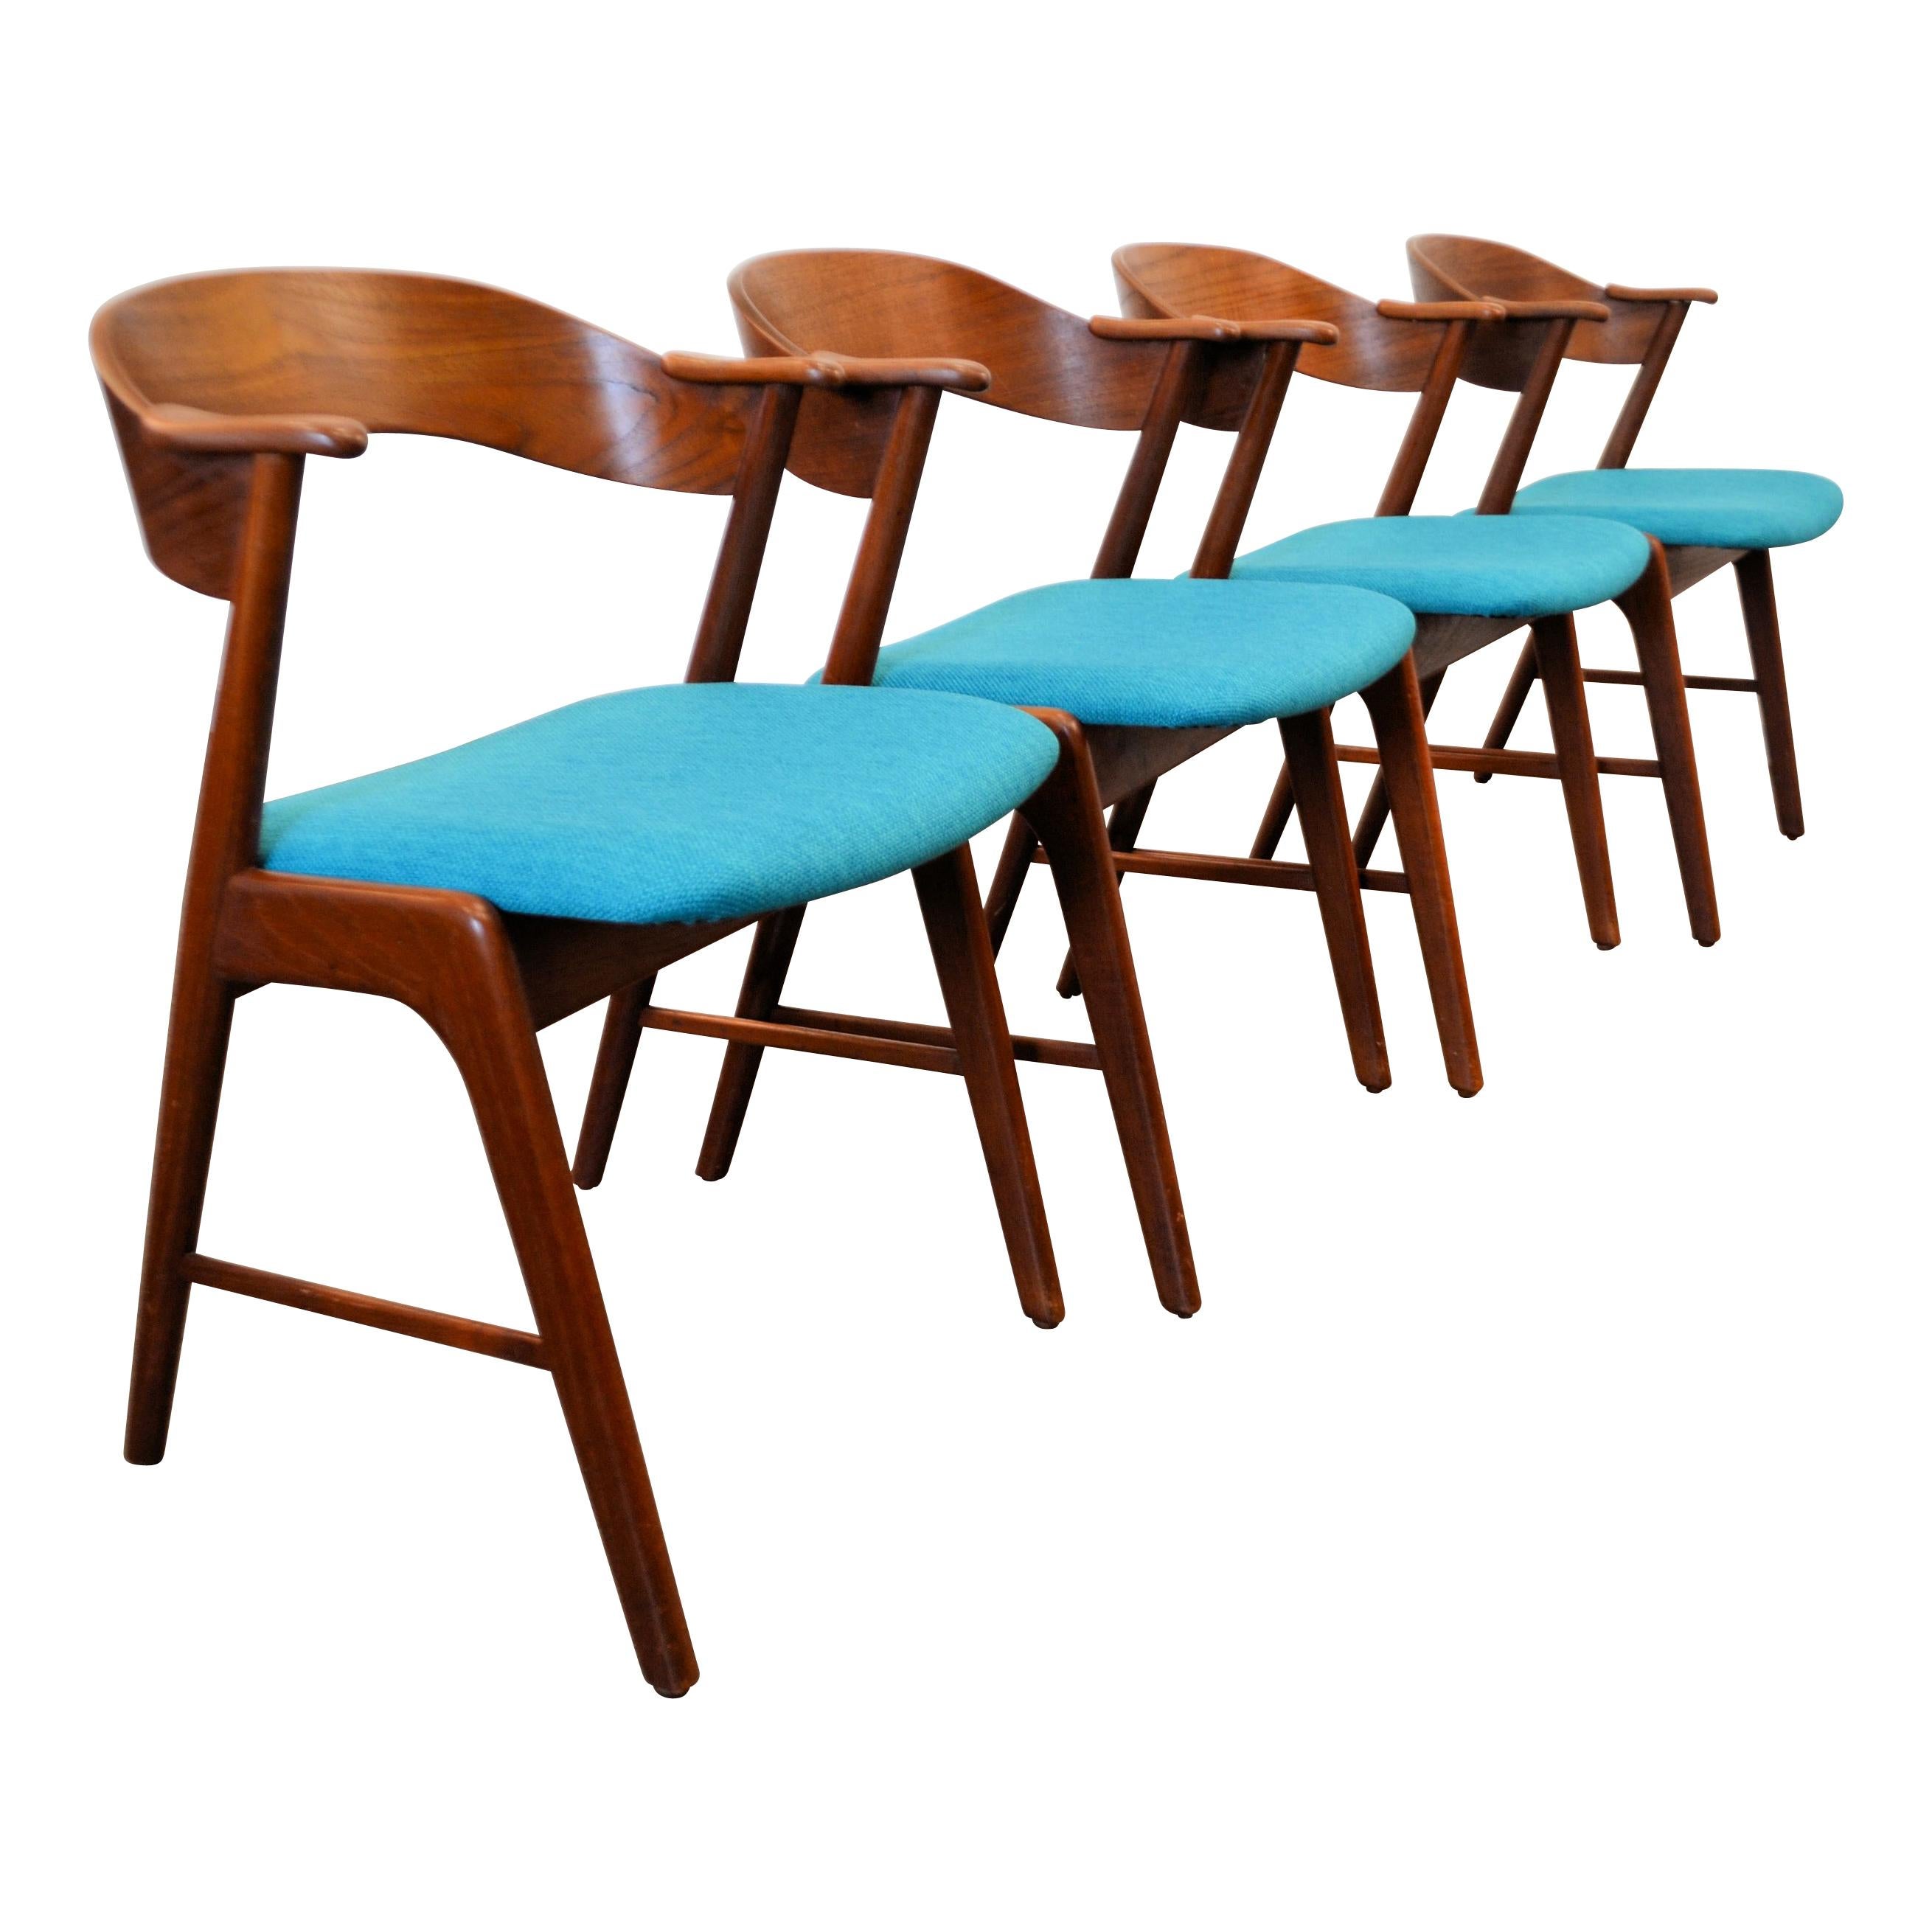 Gorgeous set of four vintage teak dining chairs designed by Kai Kristiansen for Danish manufacturer Korup Stølefabrik. Kristiansen became worldwide known and celebrated for his iconic dining chair designs. These comfortable Mid-Century Modern chairs